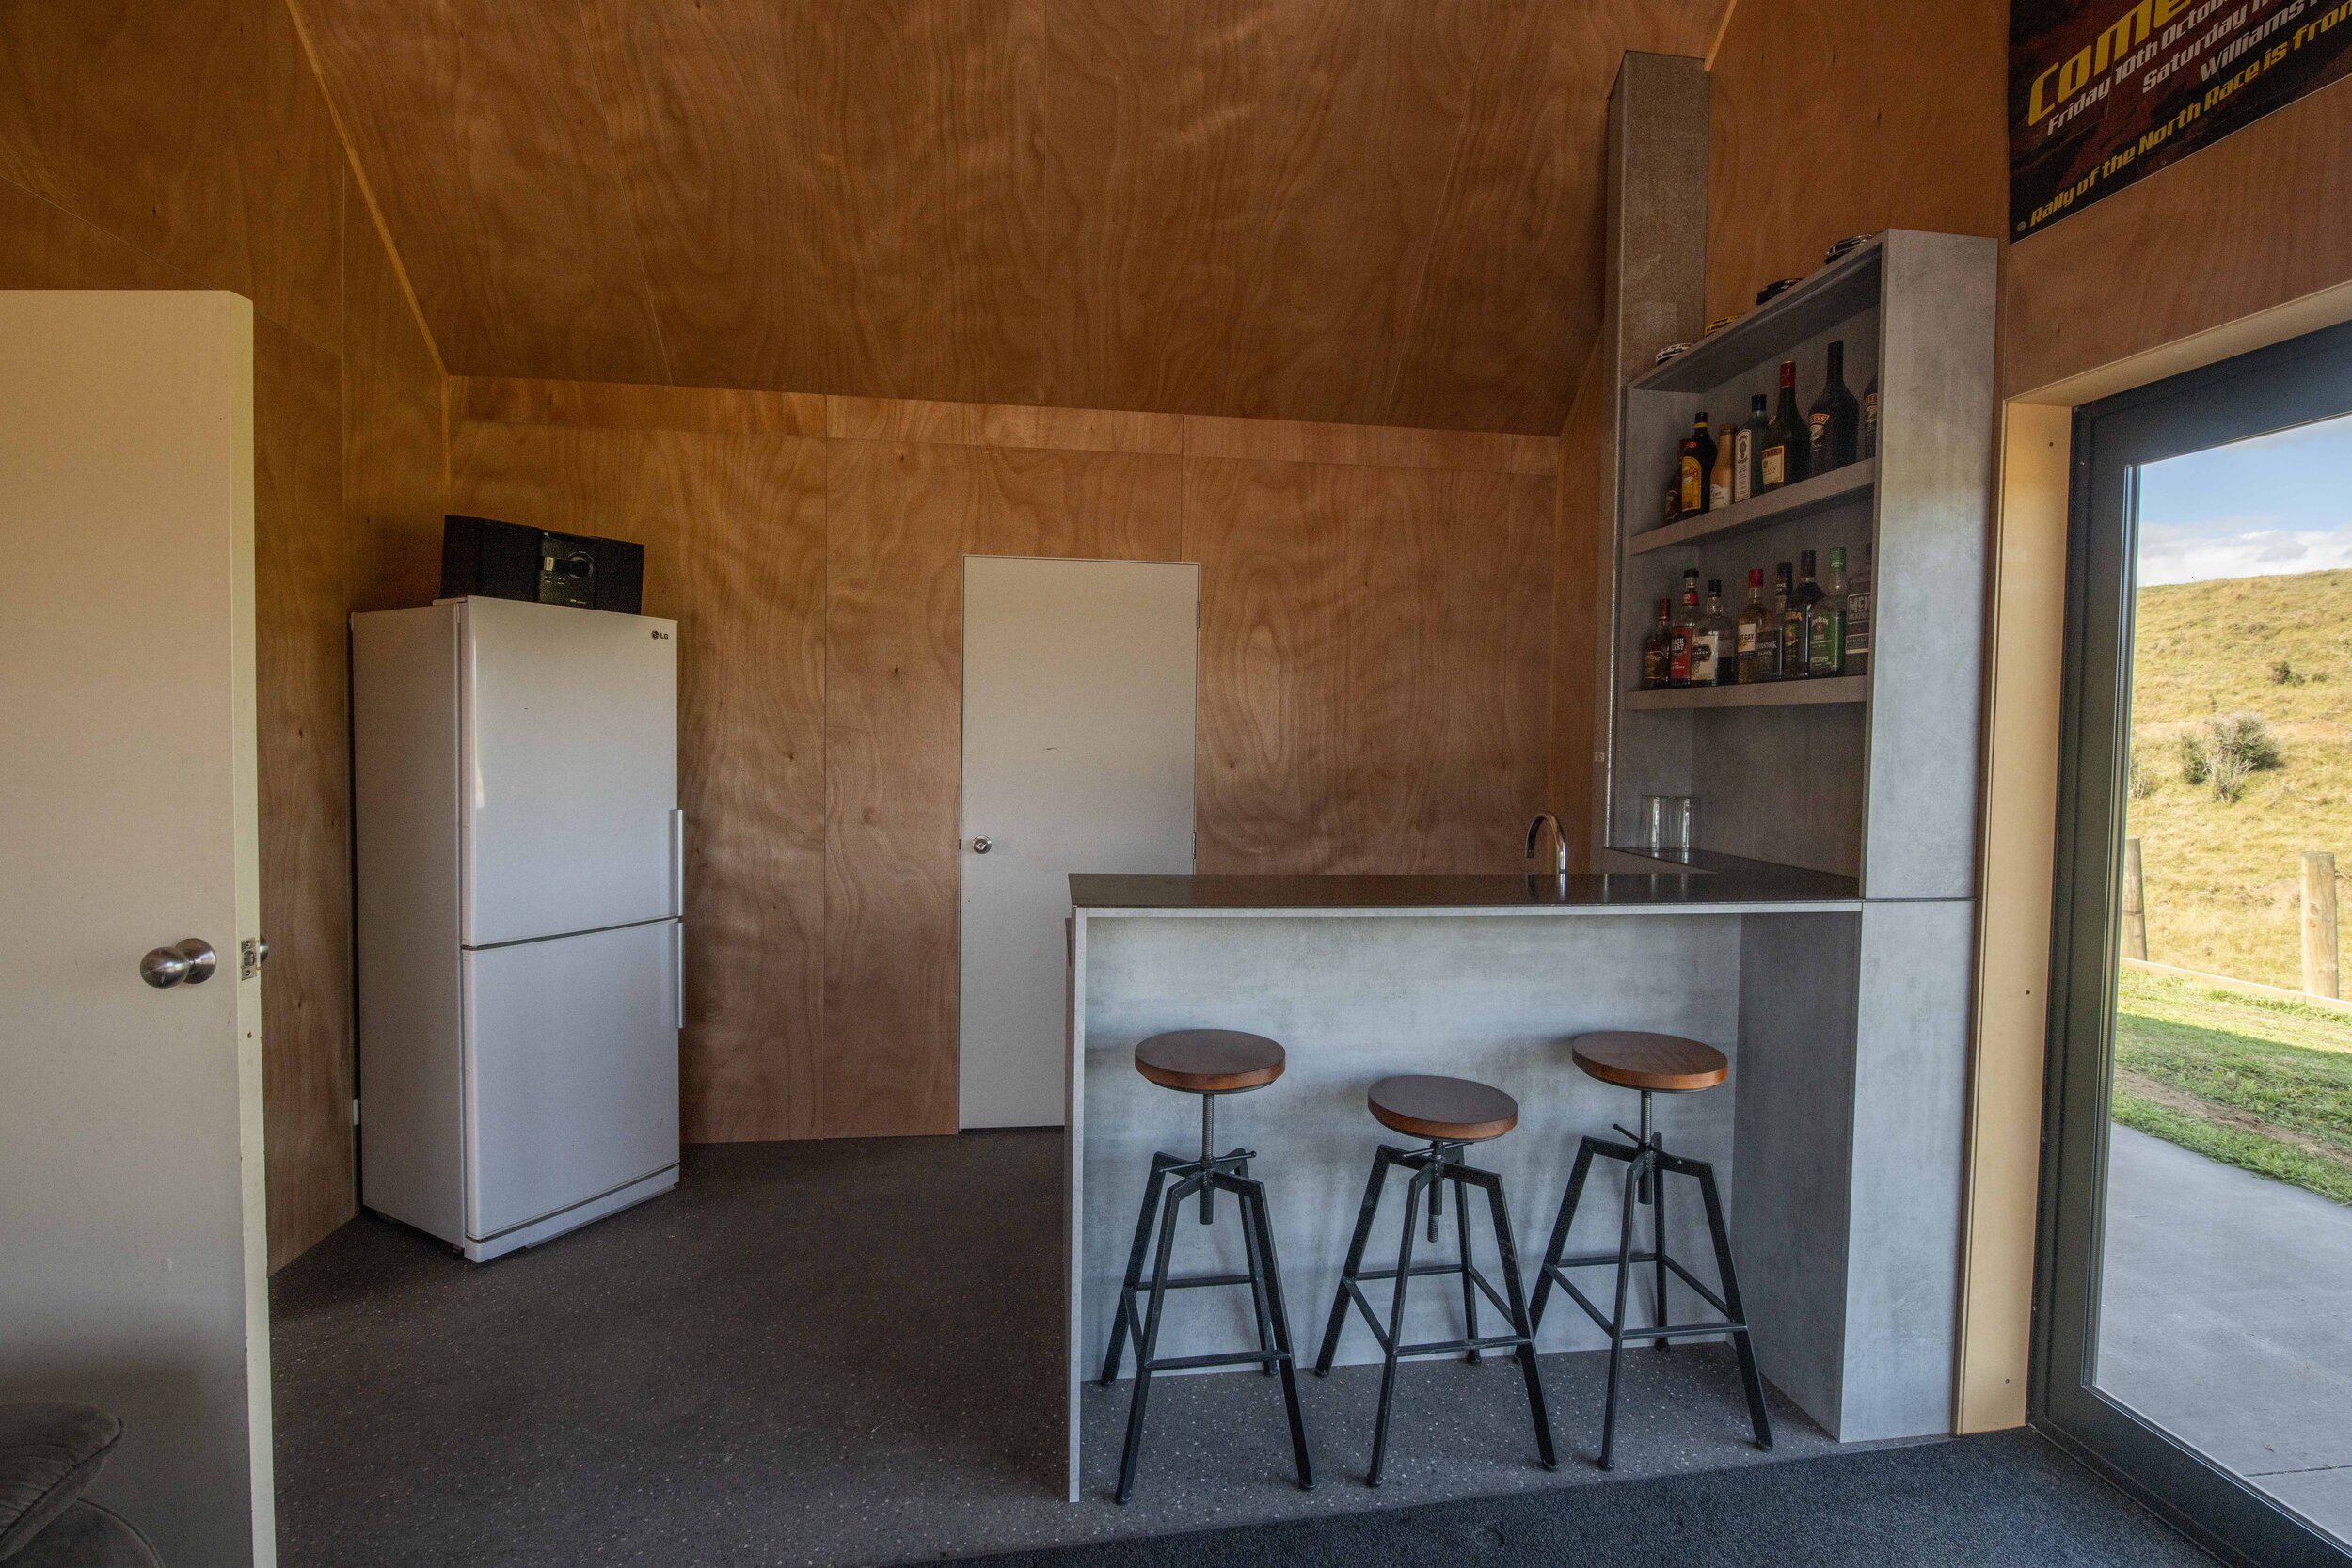 Plywood panelling creates a cosy man cave